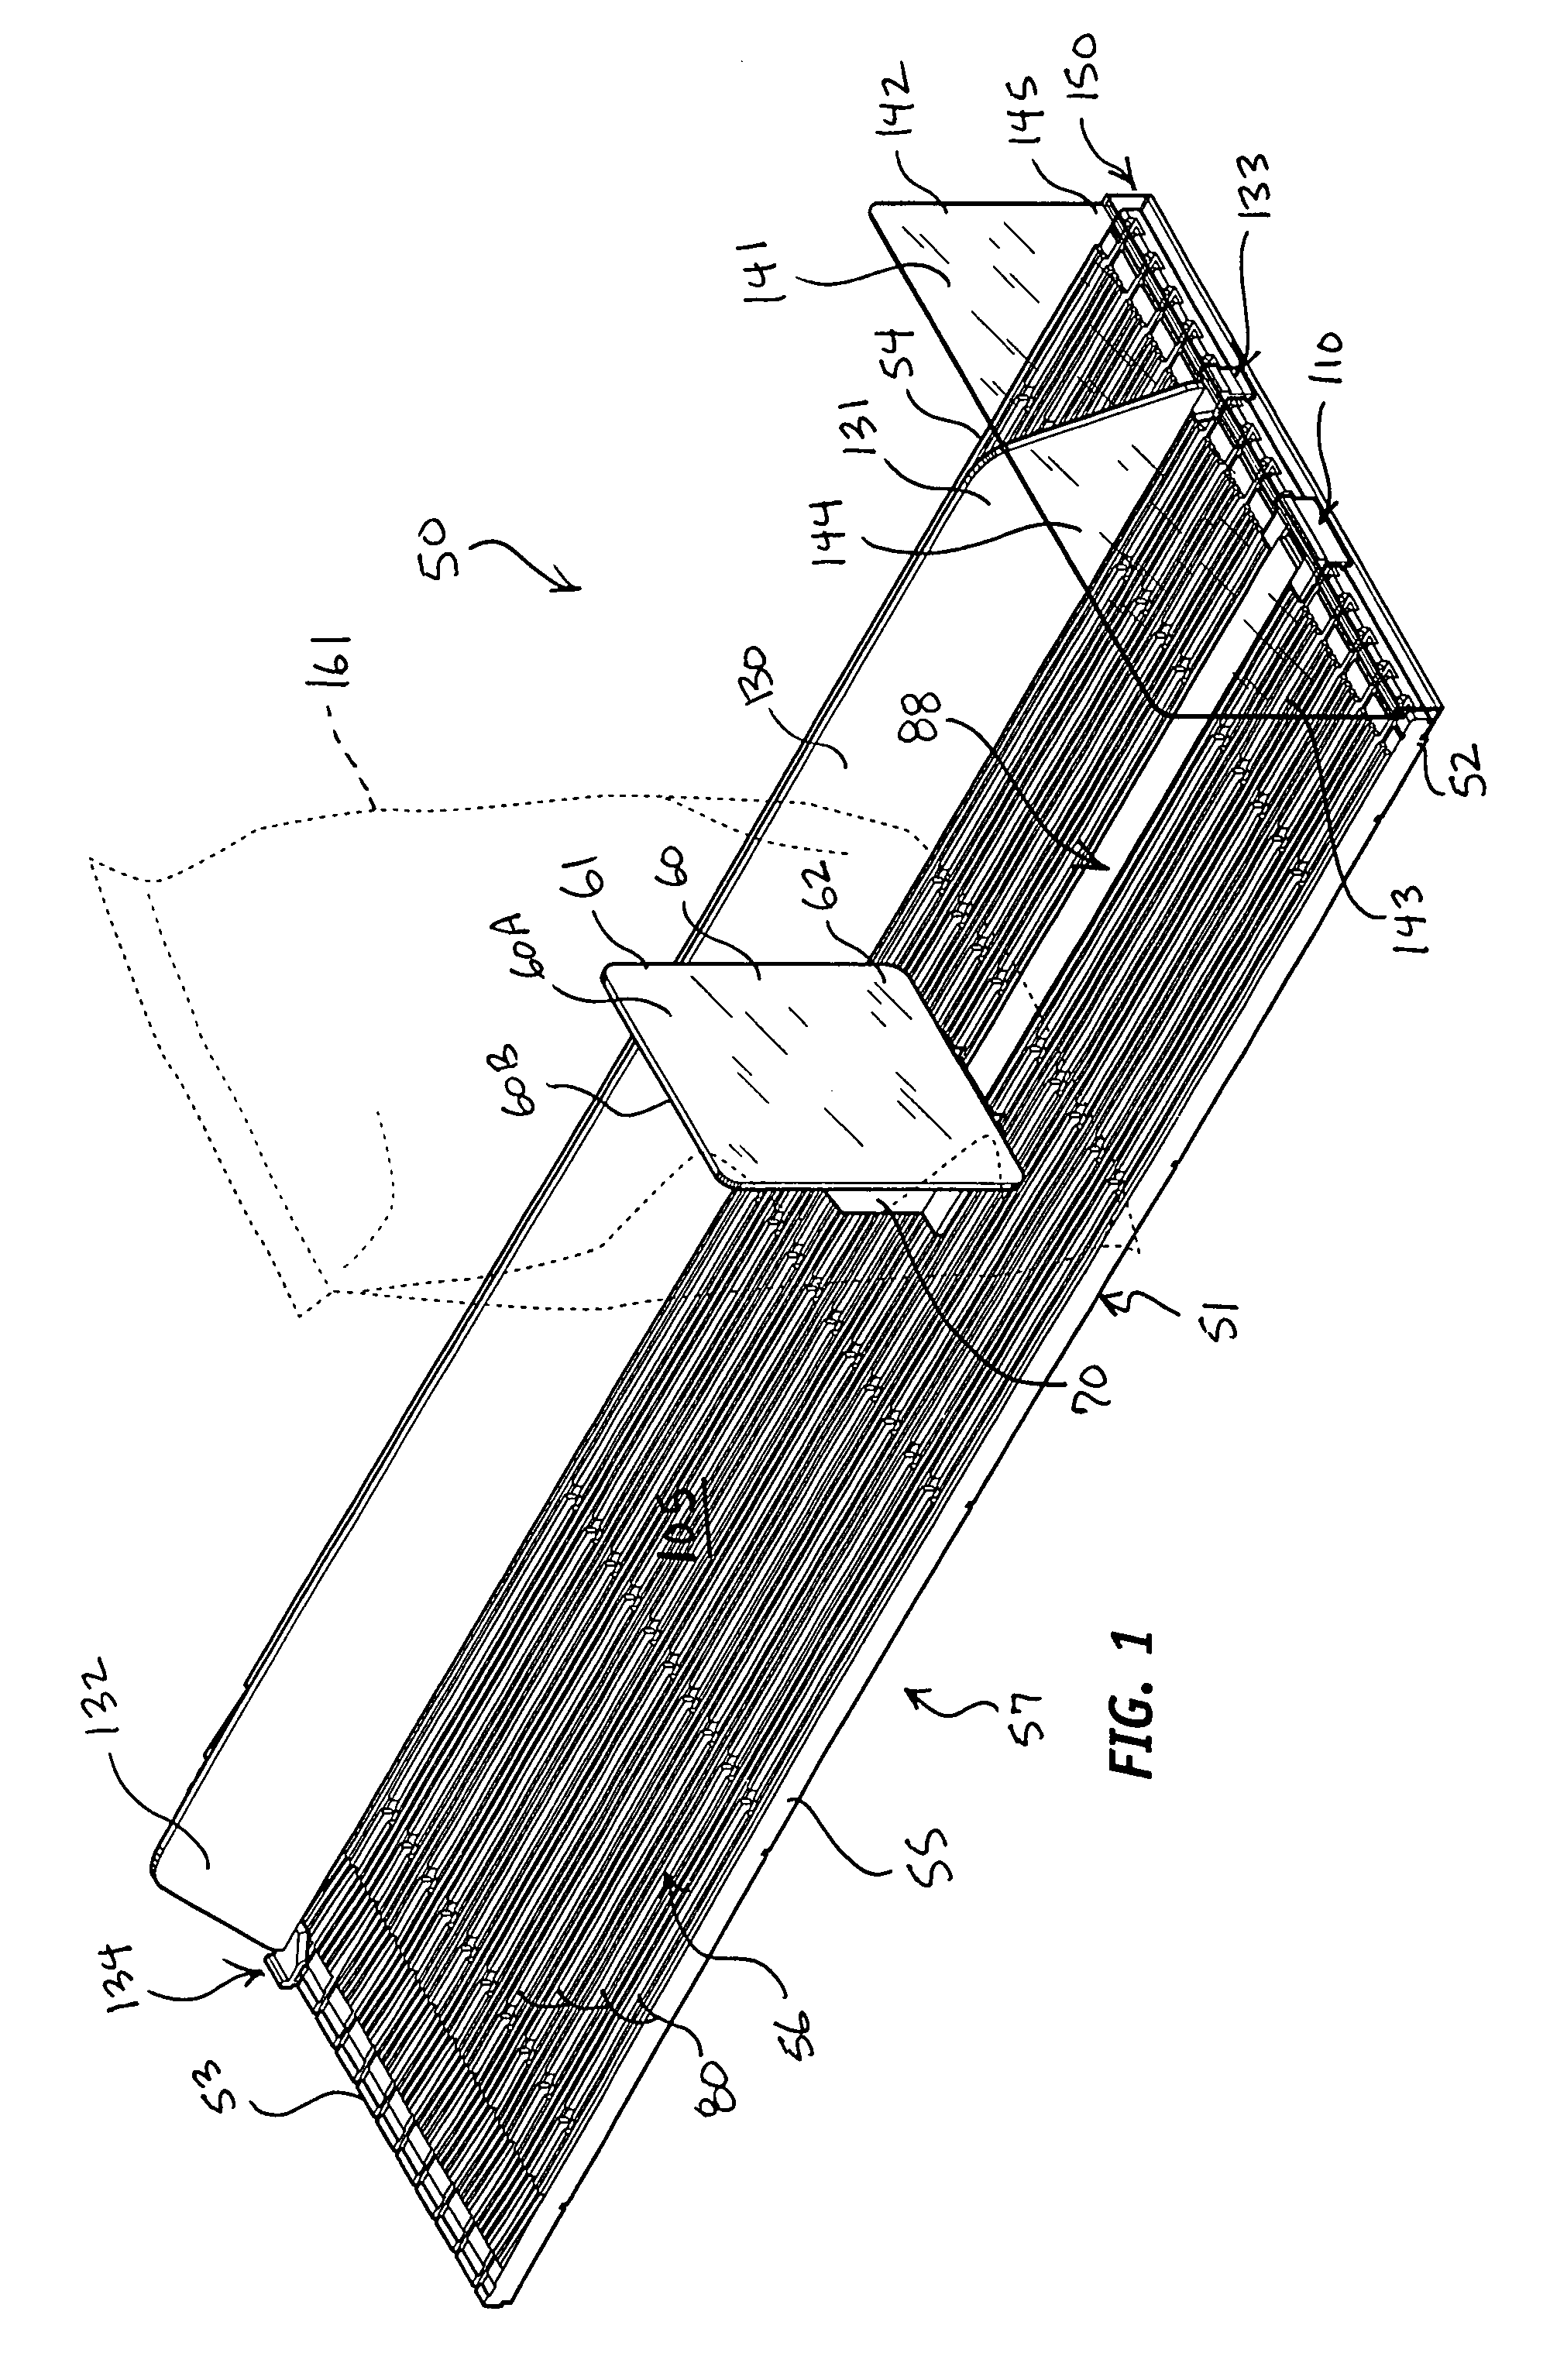 Apparatus for holding and feeding product